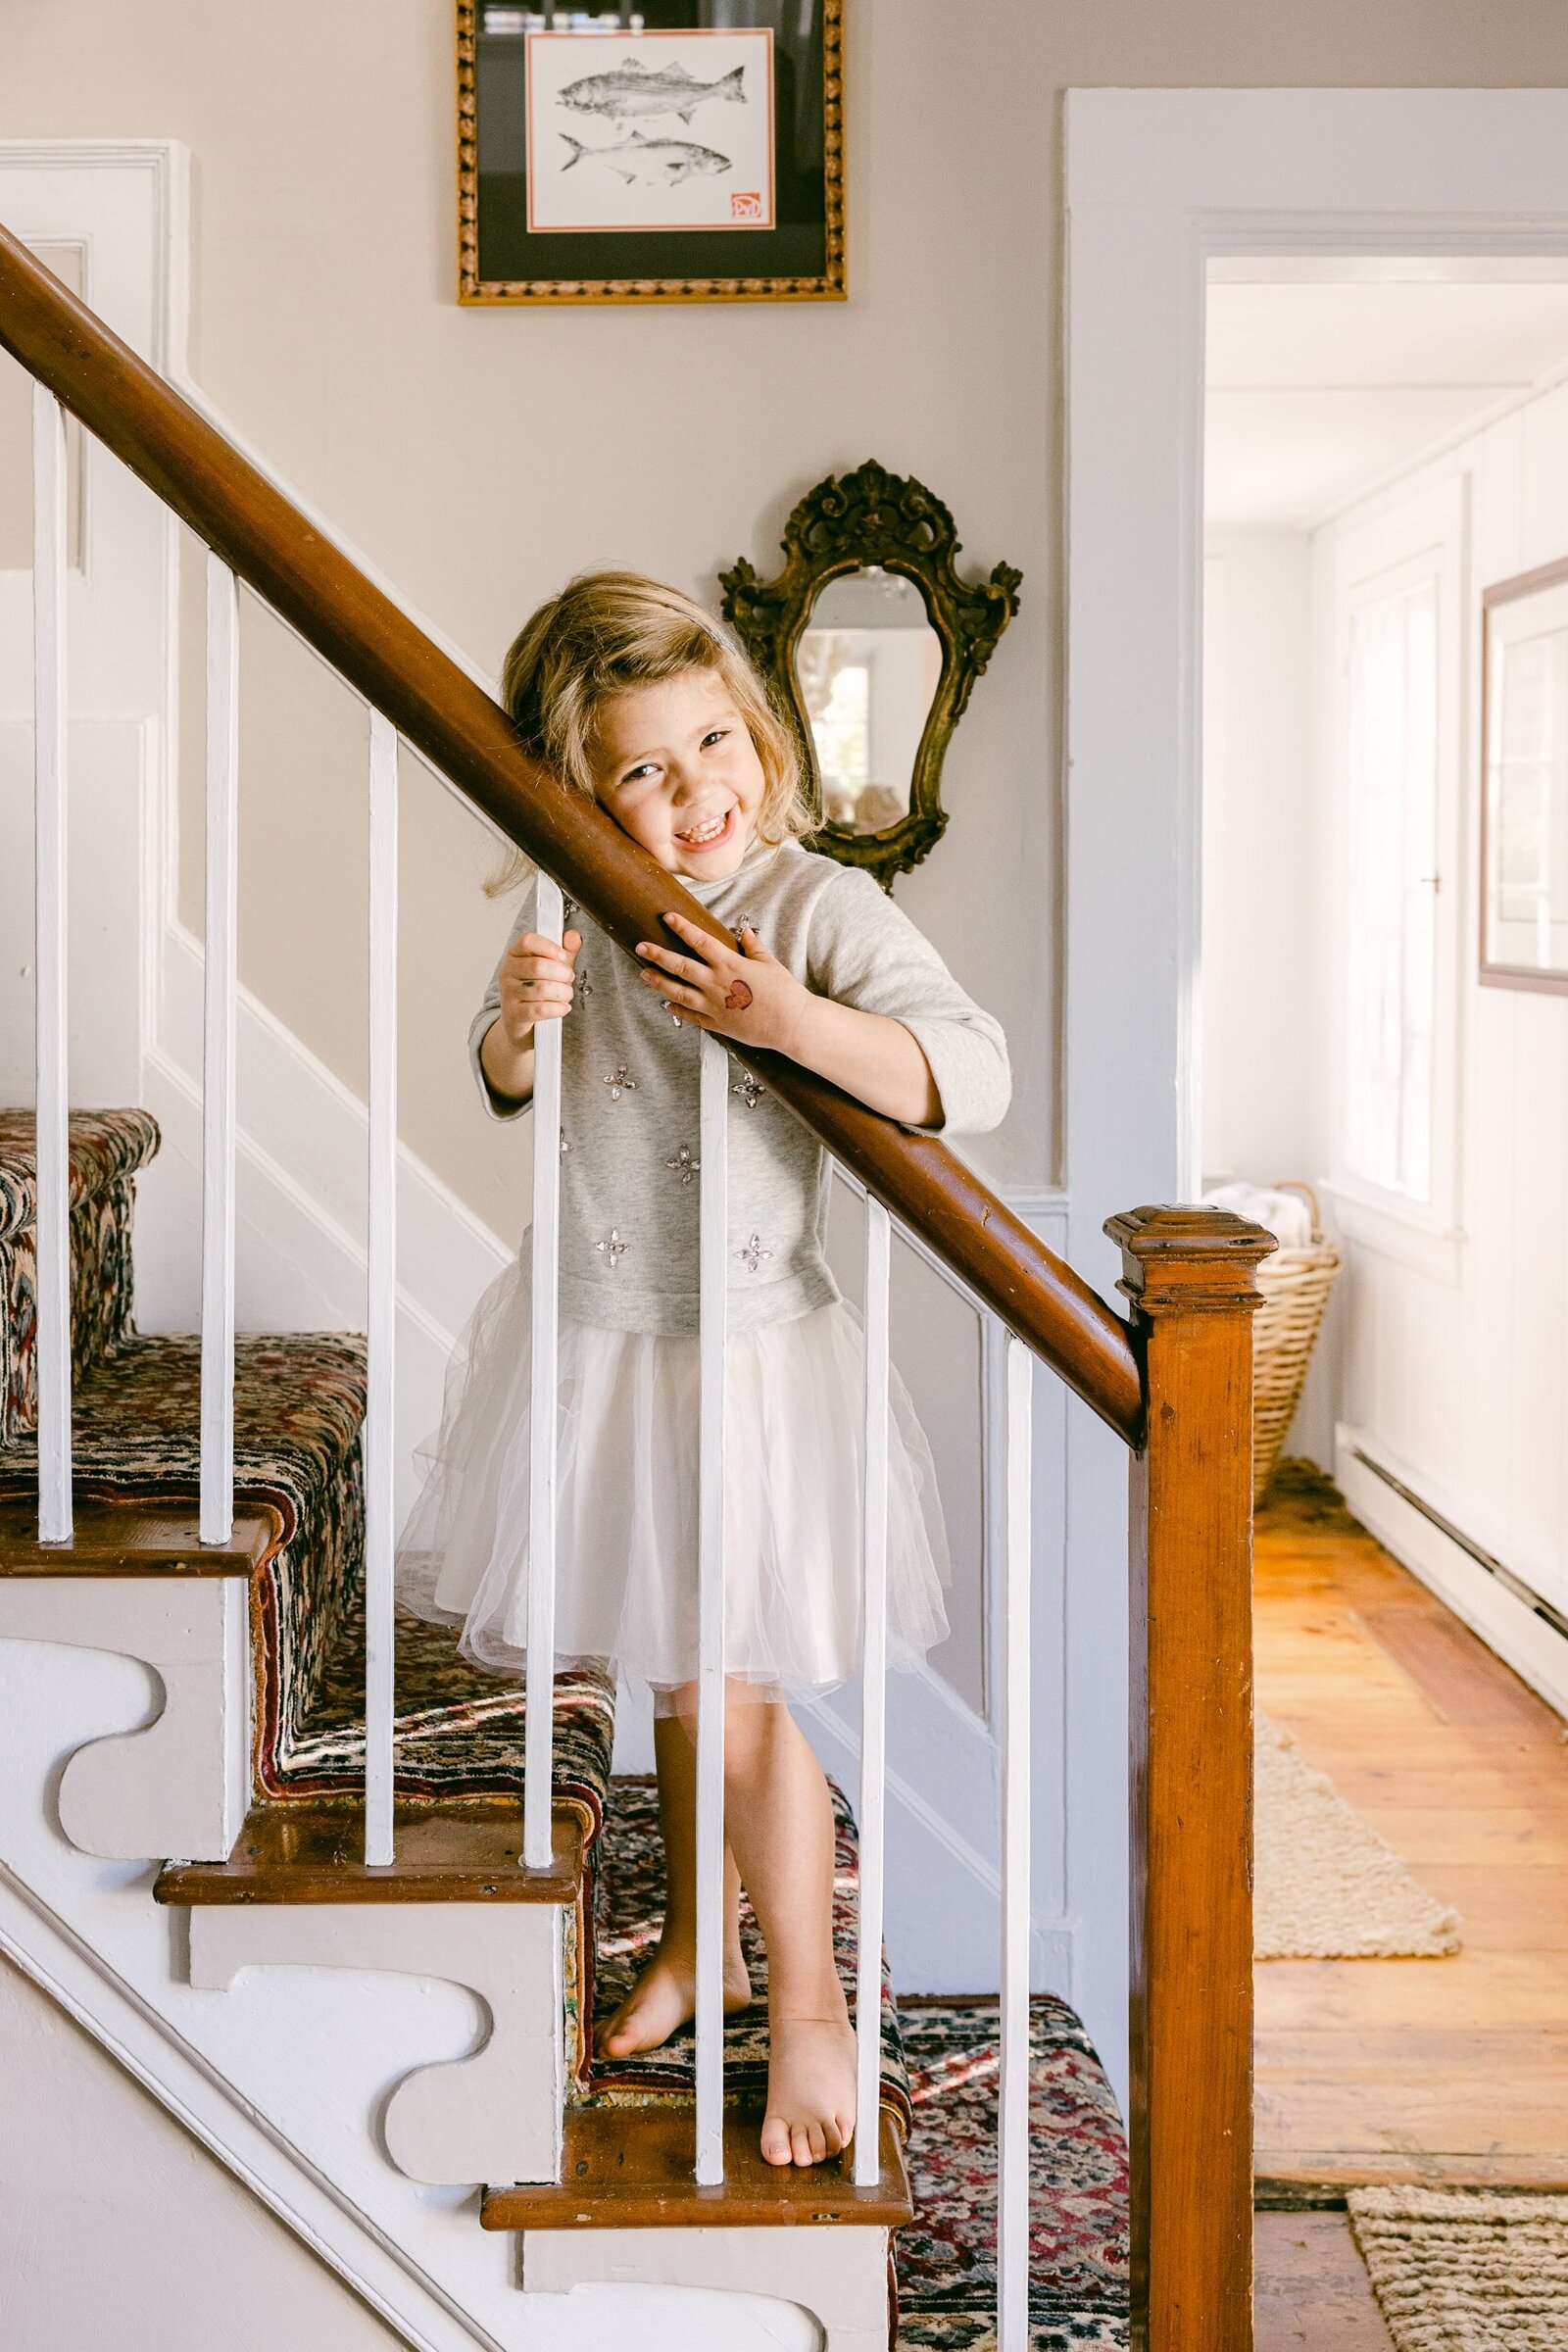 Girl on staircase smiling